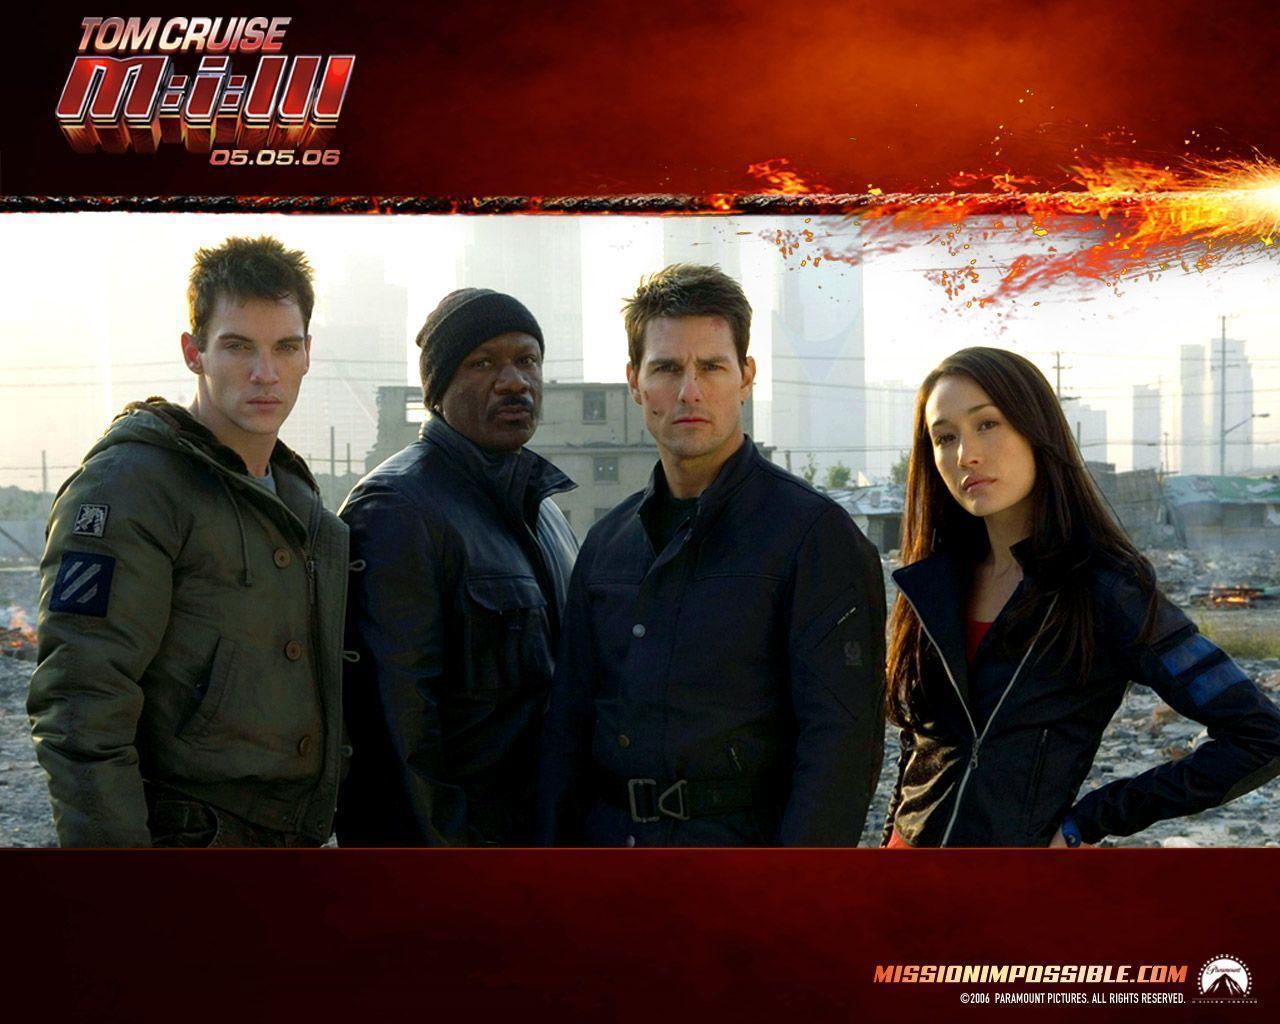 Tom Cruise Cruise in in Mission: Impossible III Wallpaper 12